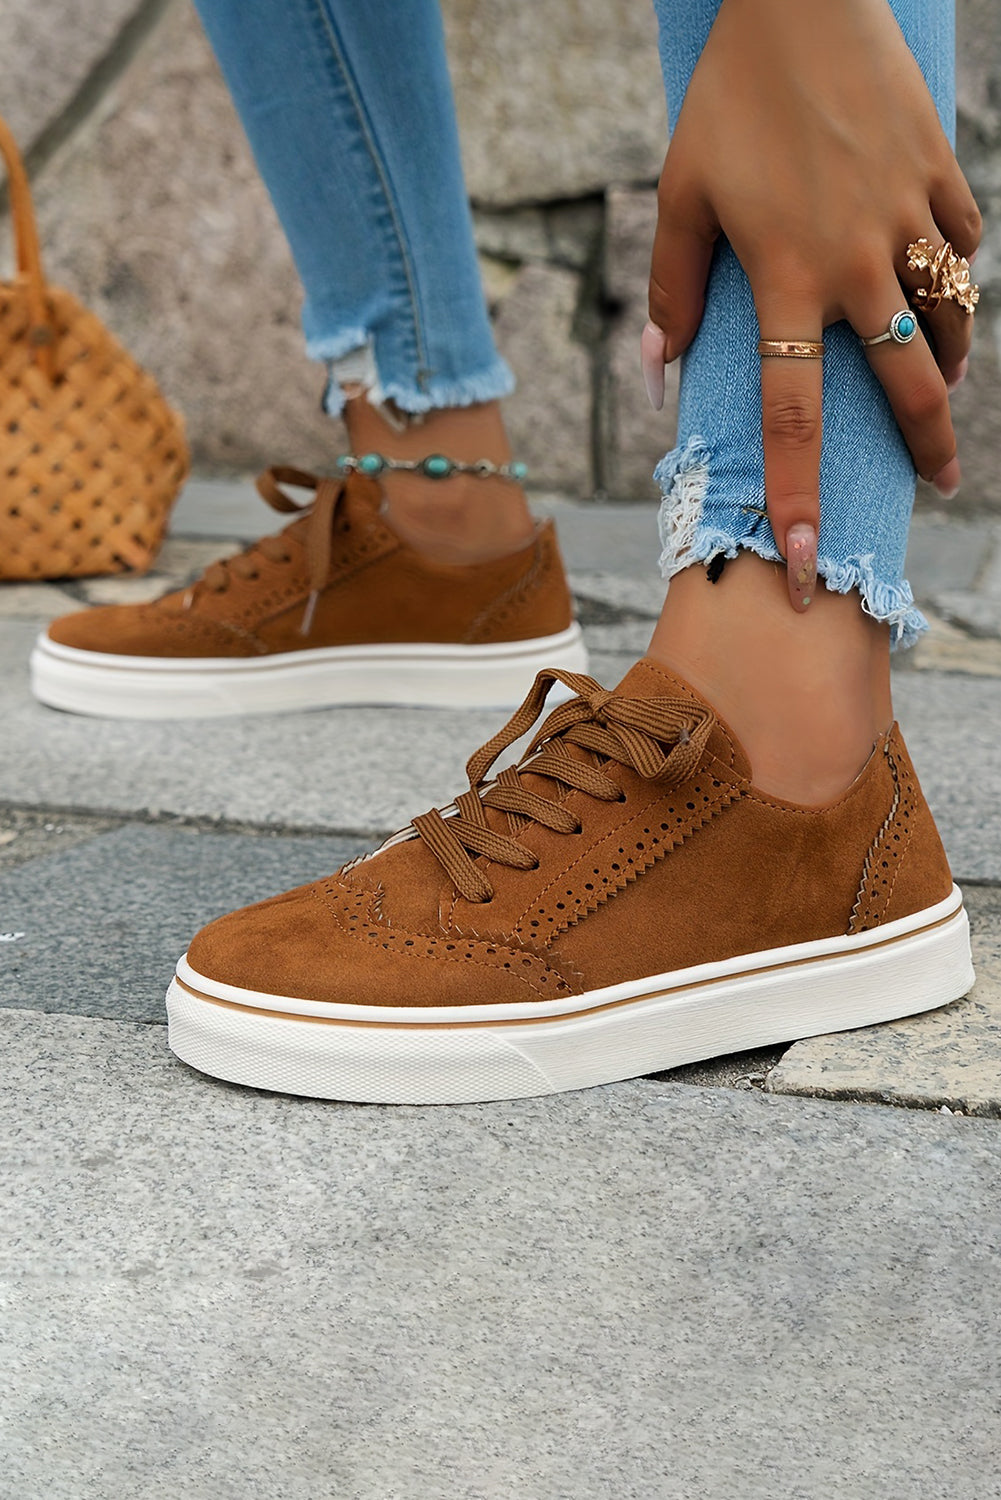 Chestnut Suede Eyelet Lace-Up Casual Sneakers Women's Shoes JT's Designer Fashion